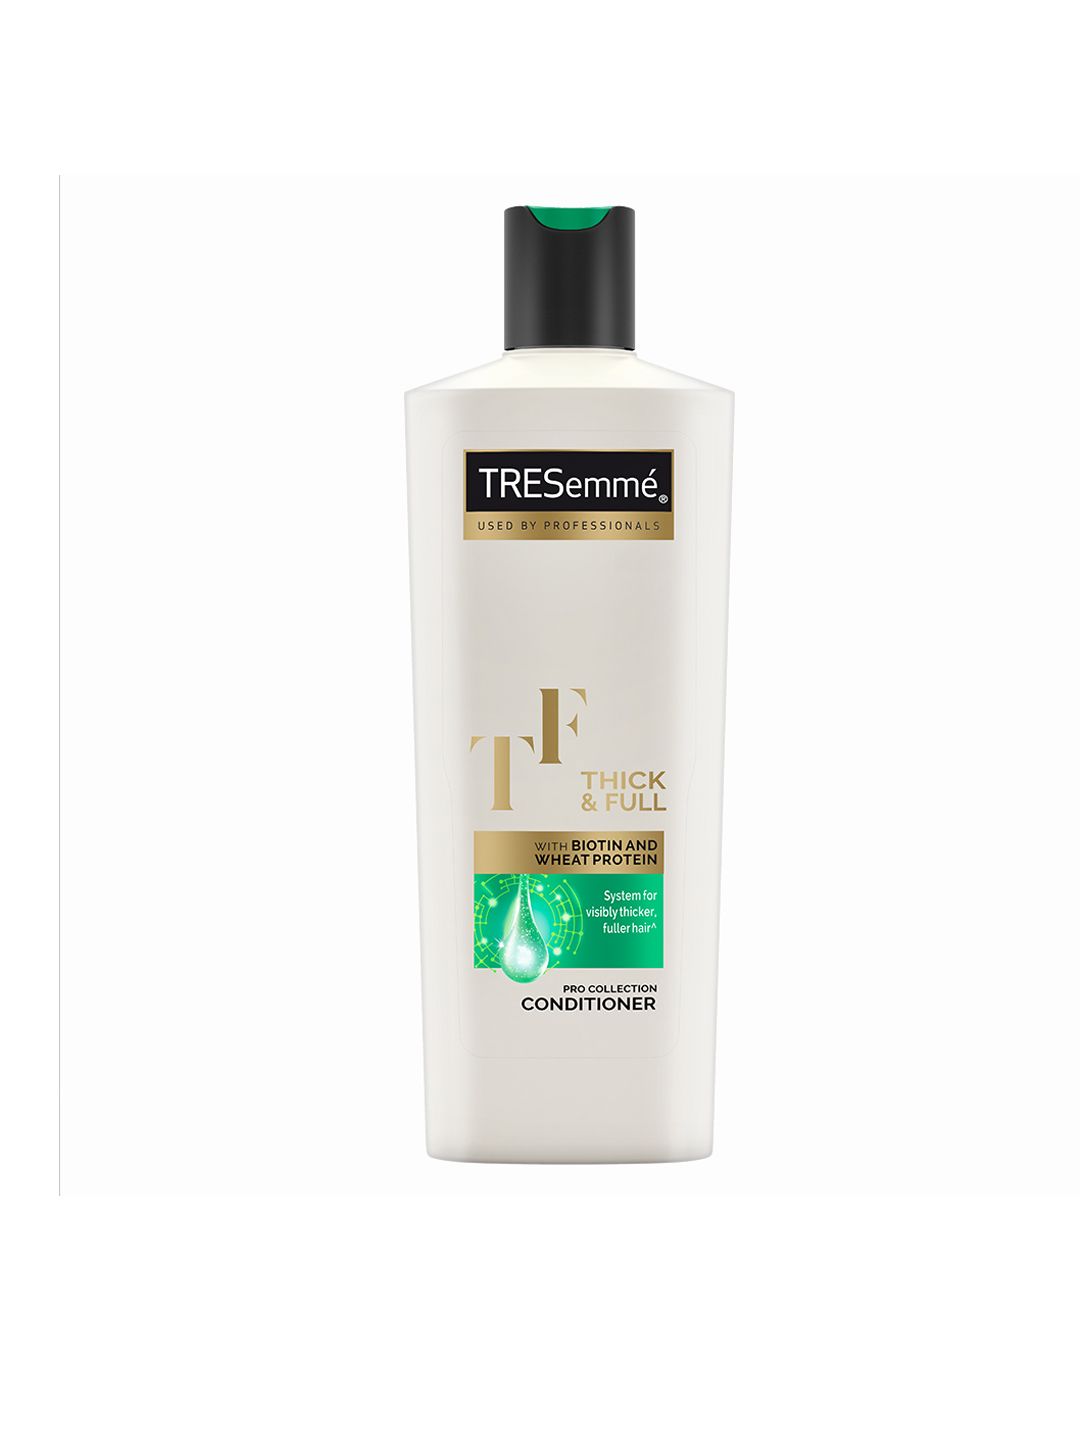 TRESemme Thick & Full Conditioner 180 ml Price in India